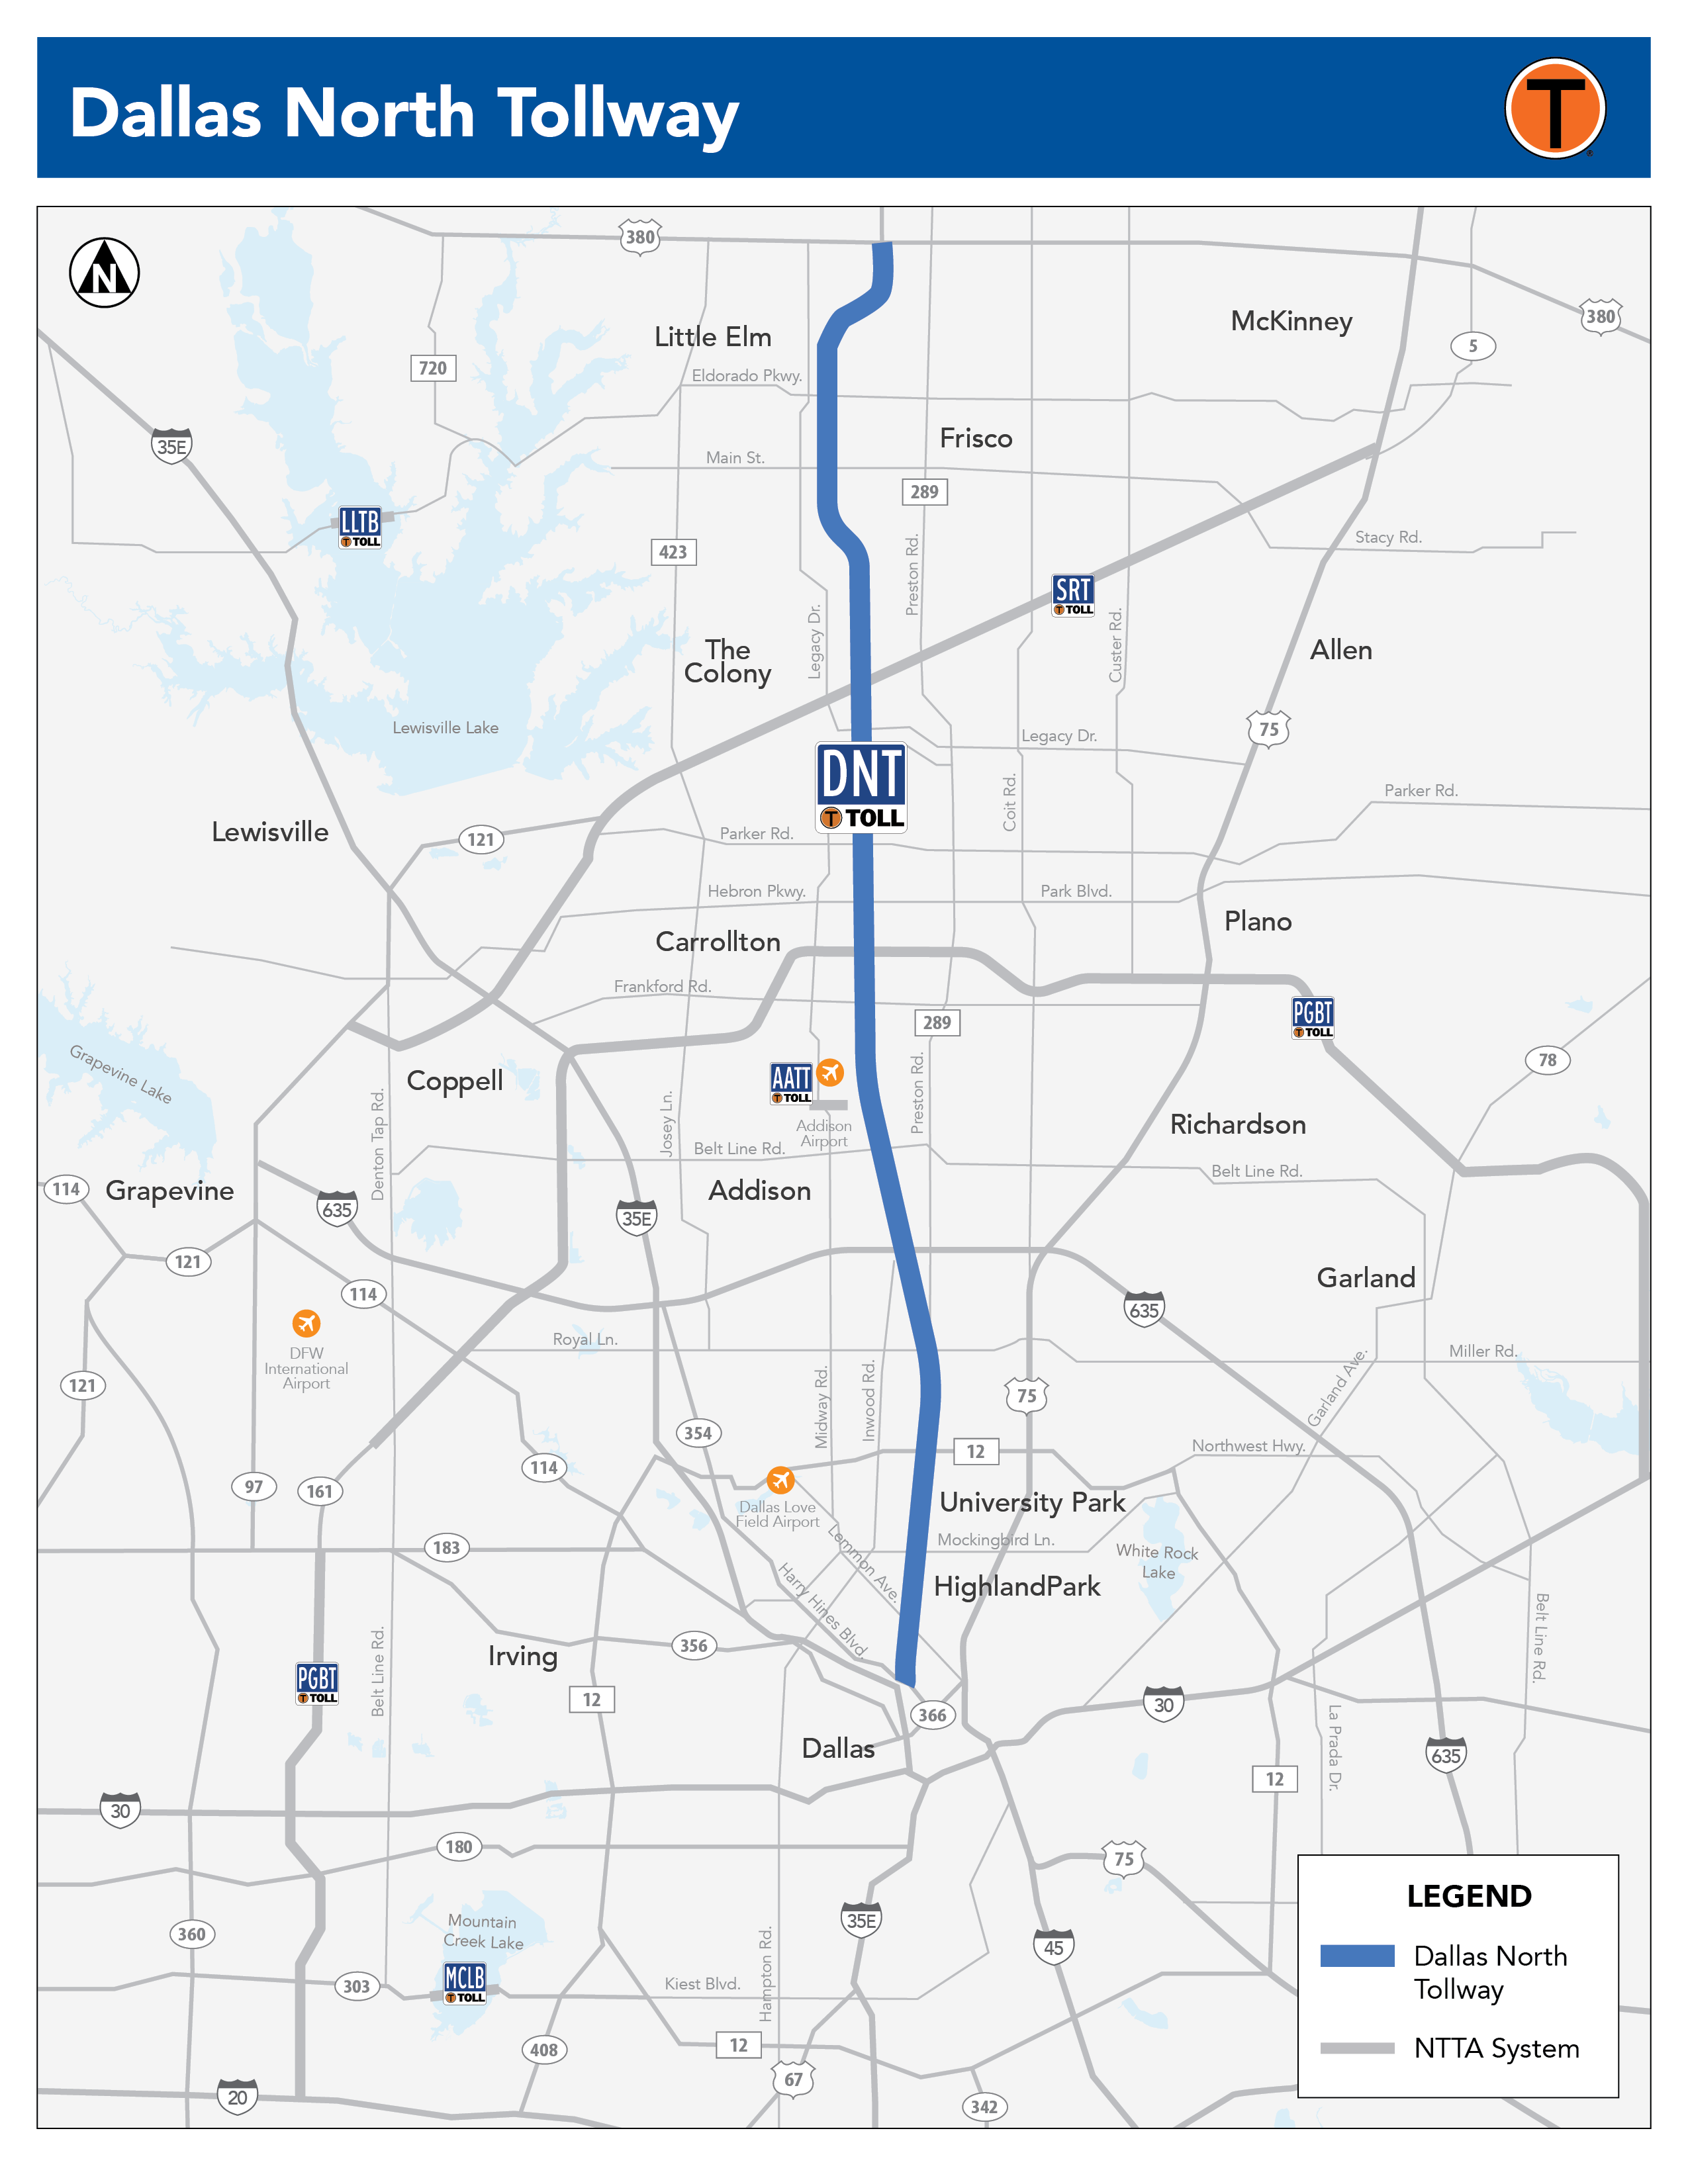 Dallas North Tollway Future Expansion Map